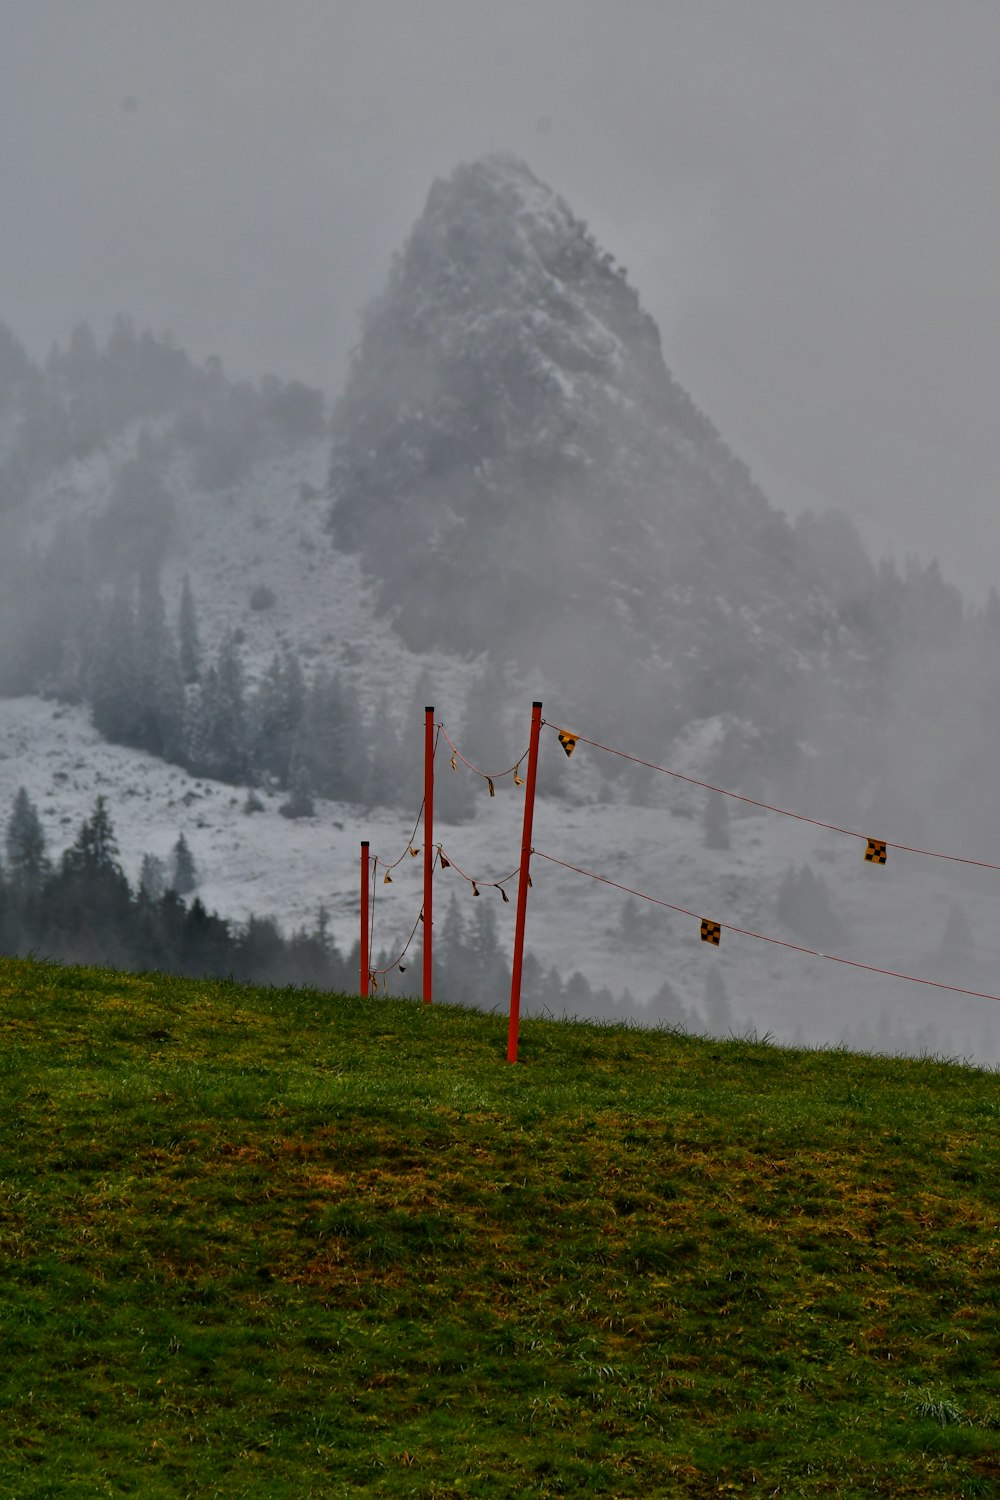 a foggy mountain with a red fence in the foreground